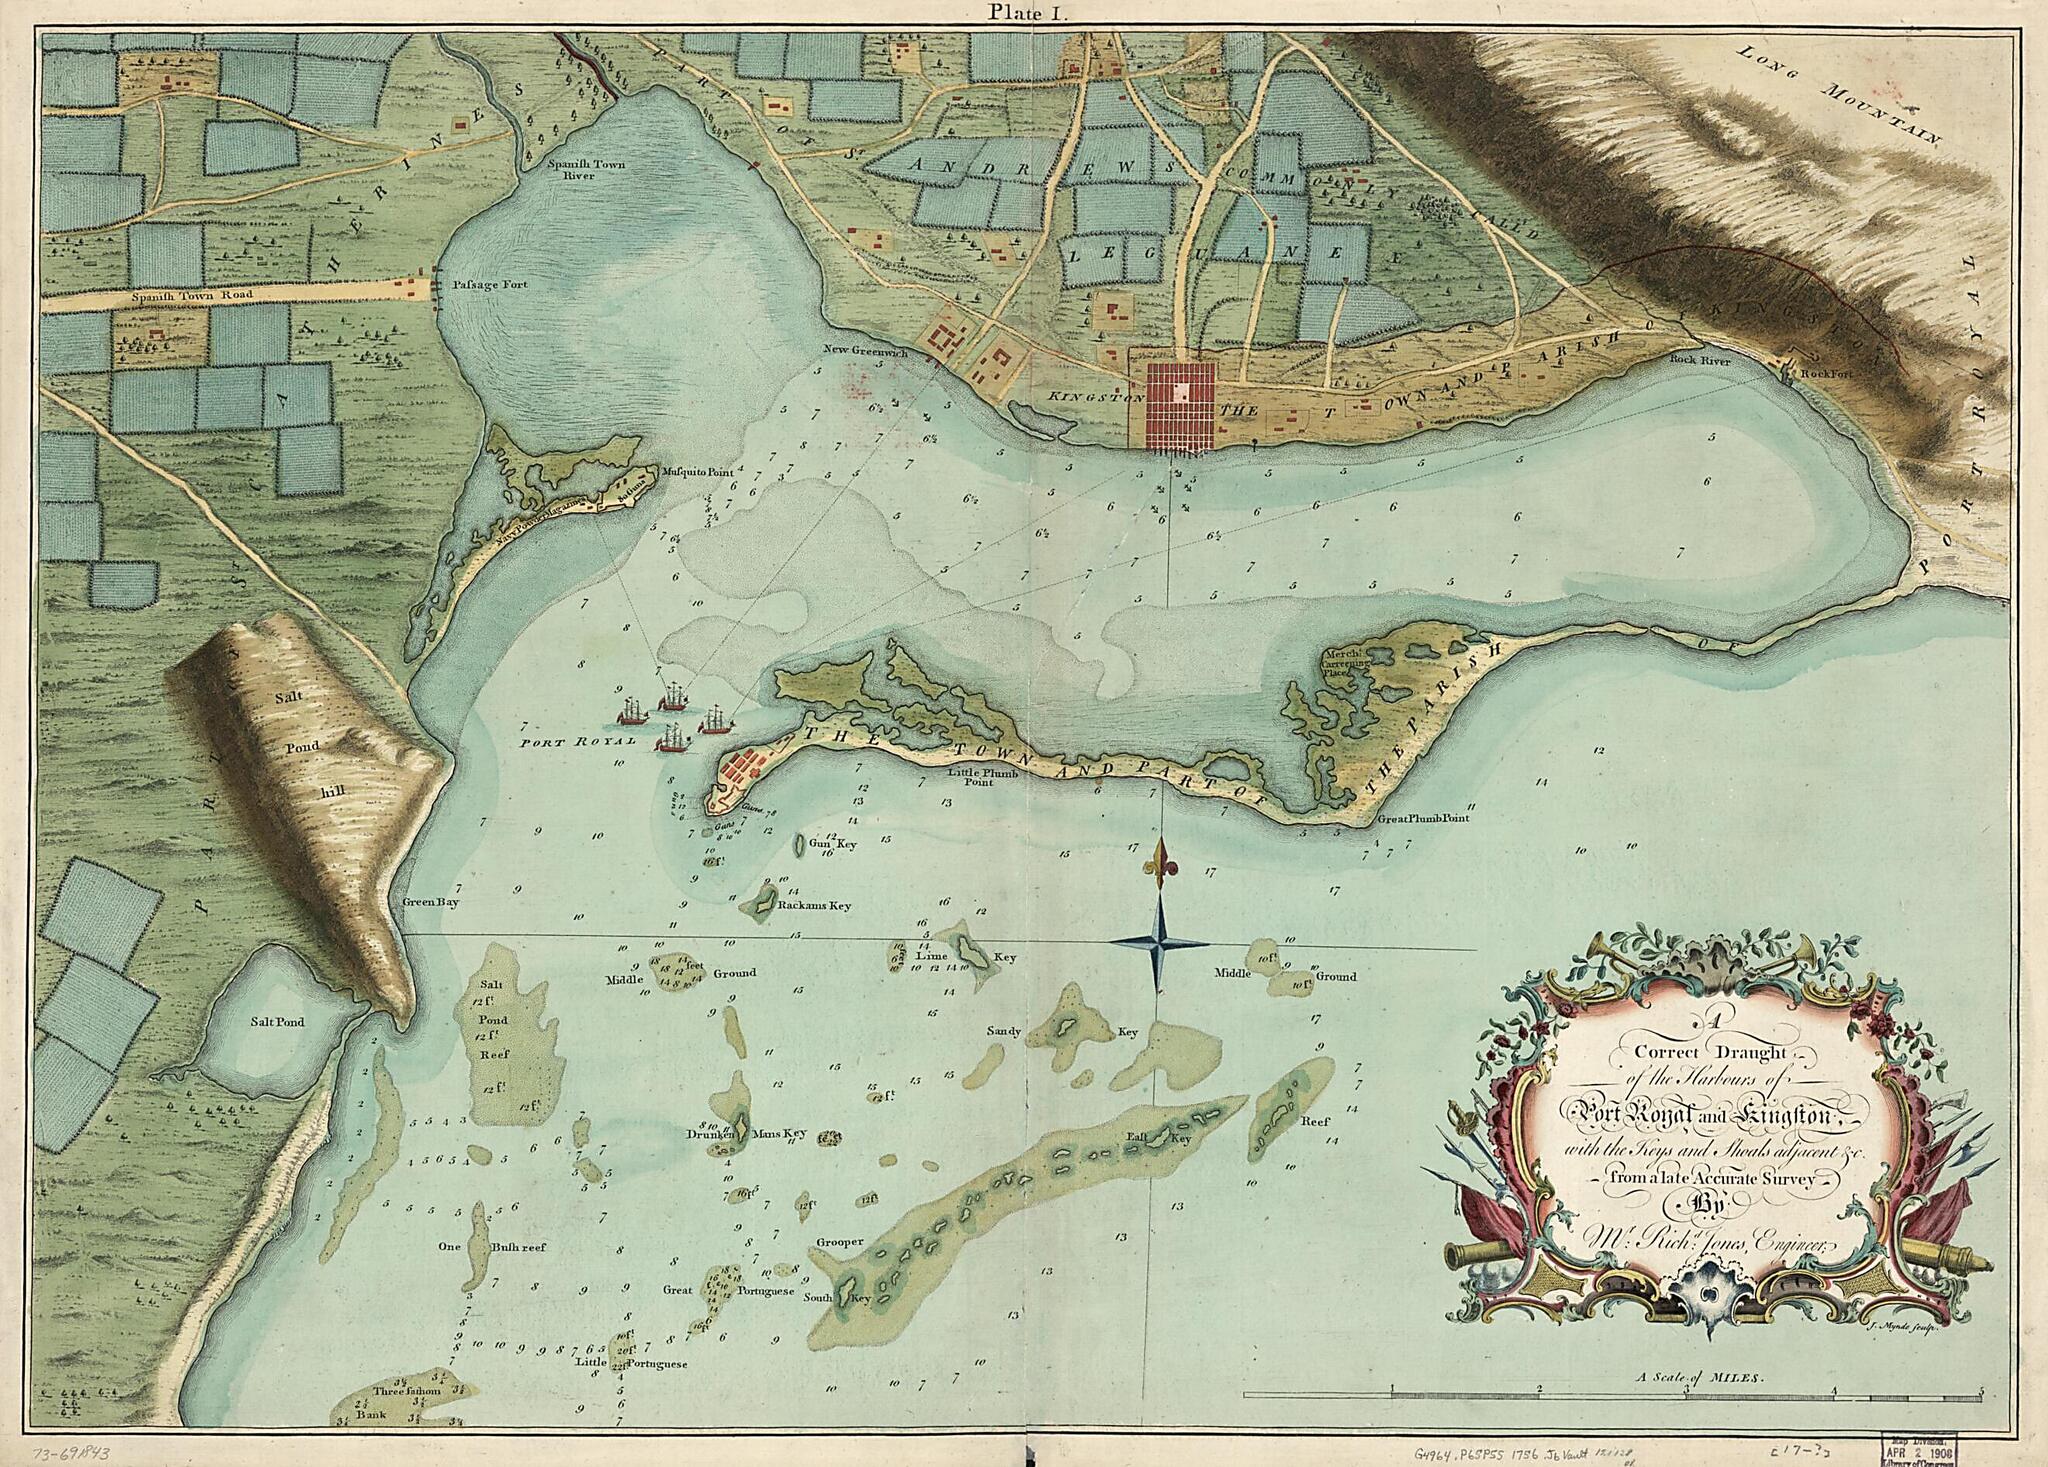 This old map of A Correct Draught of the Harbours of Port Royal and Kingston, With the Keys and Shoals Adjacent &amp;c. from a Late Accurate Survey, by Mr. Richd Jones, Engineer from 1756 was created by Richard Jones, J. Mynde in 1756